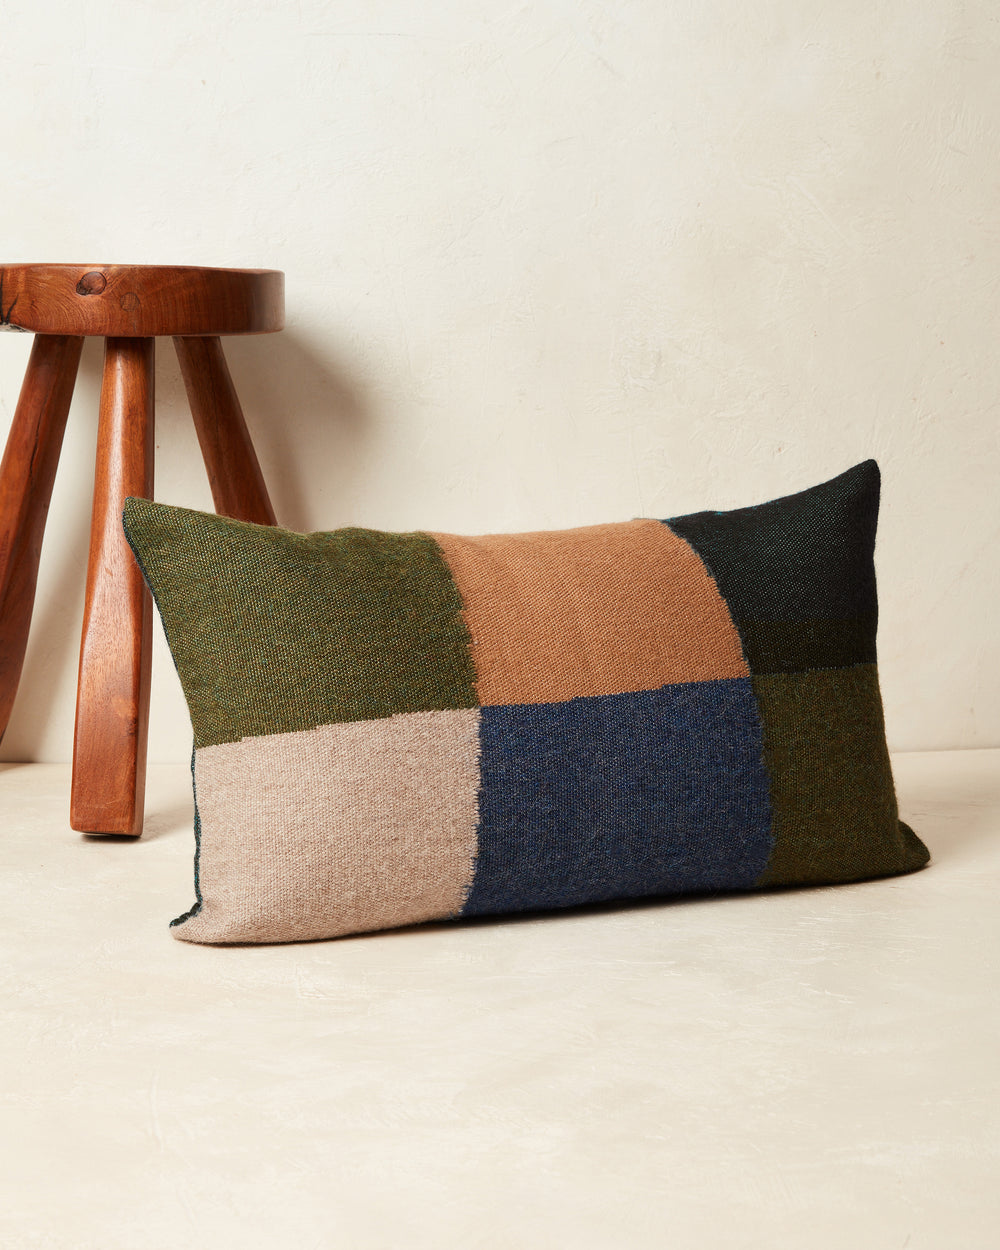 Patchwork Lumbar Pillow in Terracotta - Ethical Home Decor